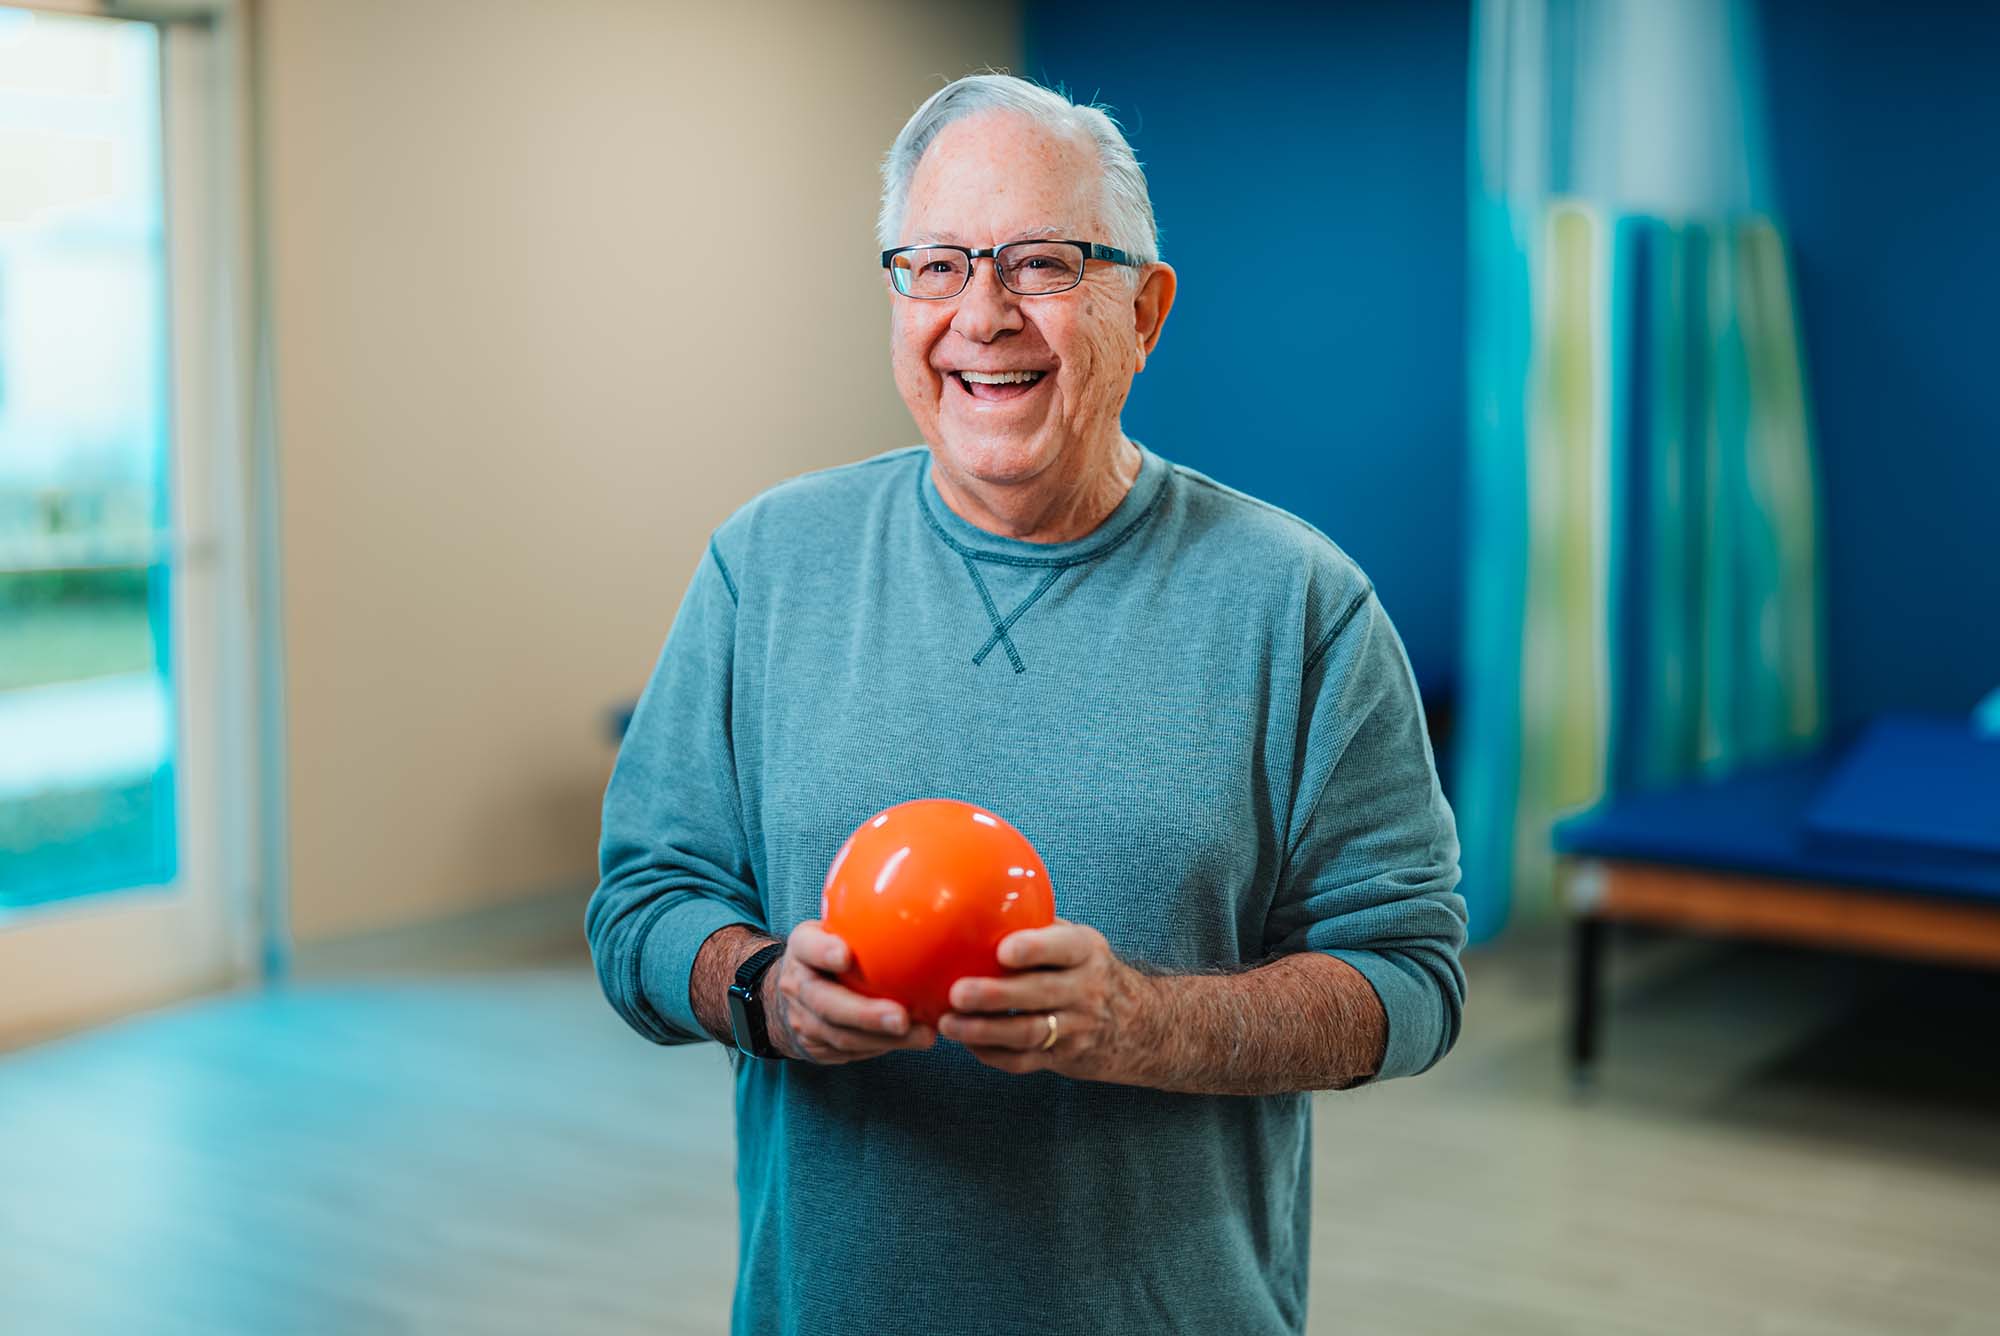 A senior man hold a physical therapy ball in an indoor rehabilitation room